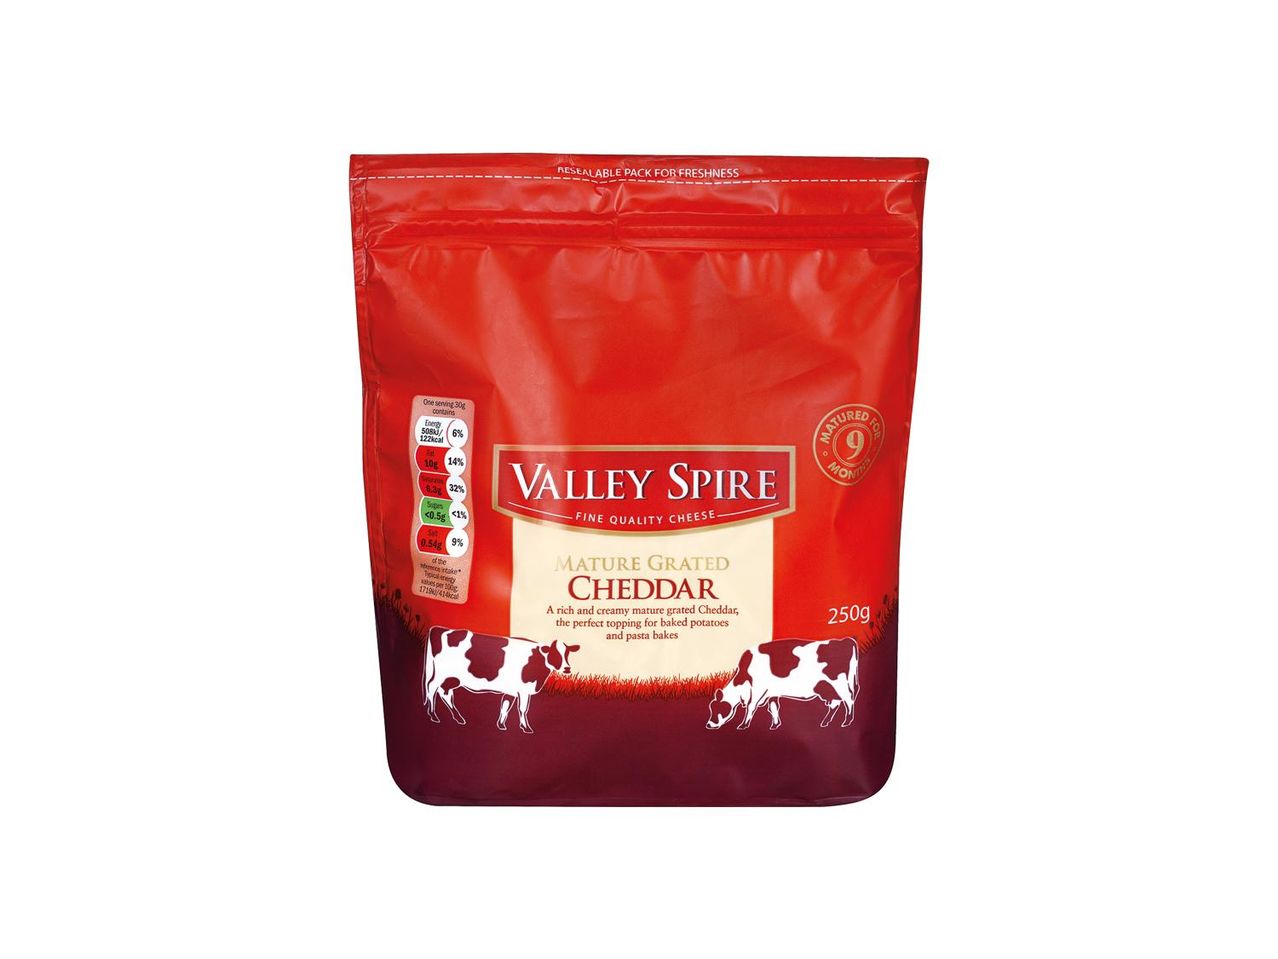 Go to full screen view: Valley Spire Mature Grated Cheddar - Image 1